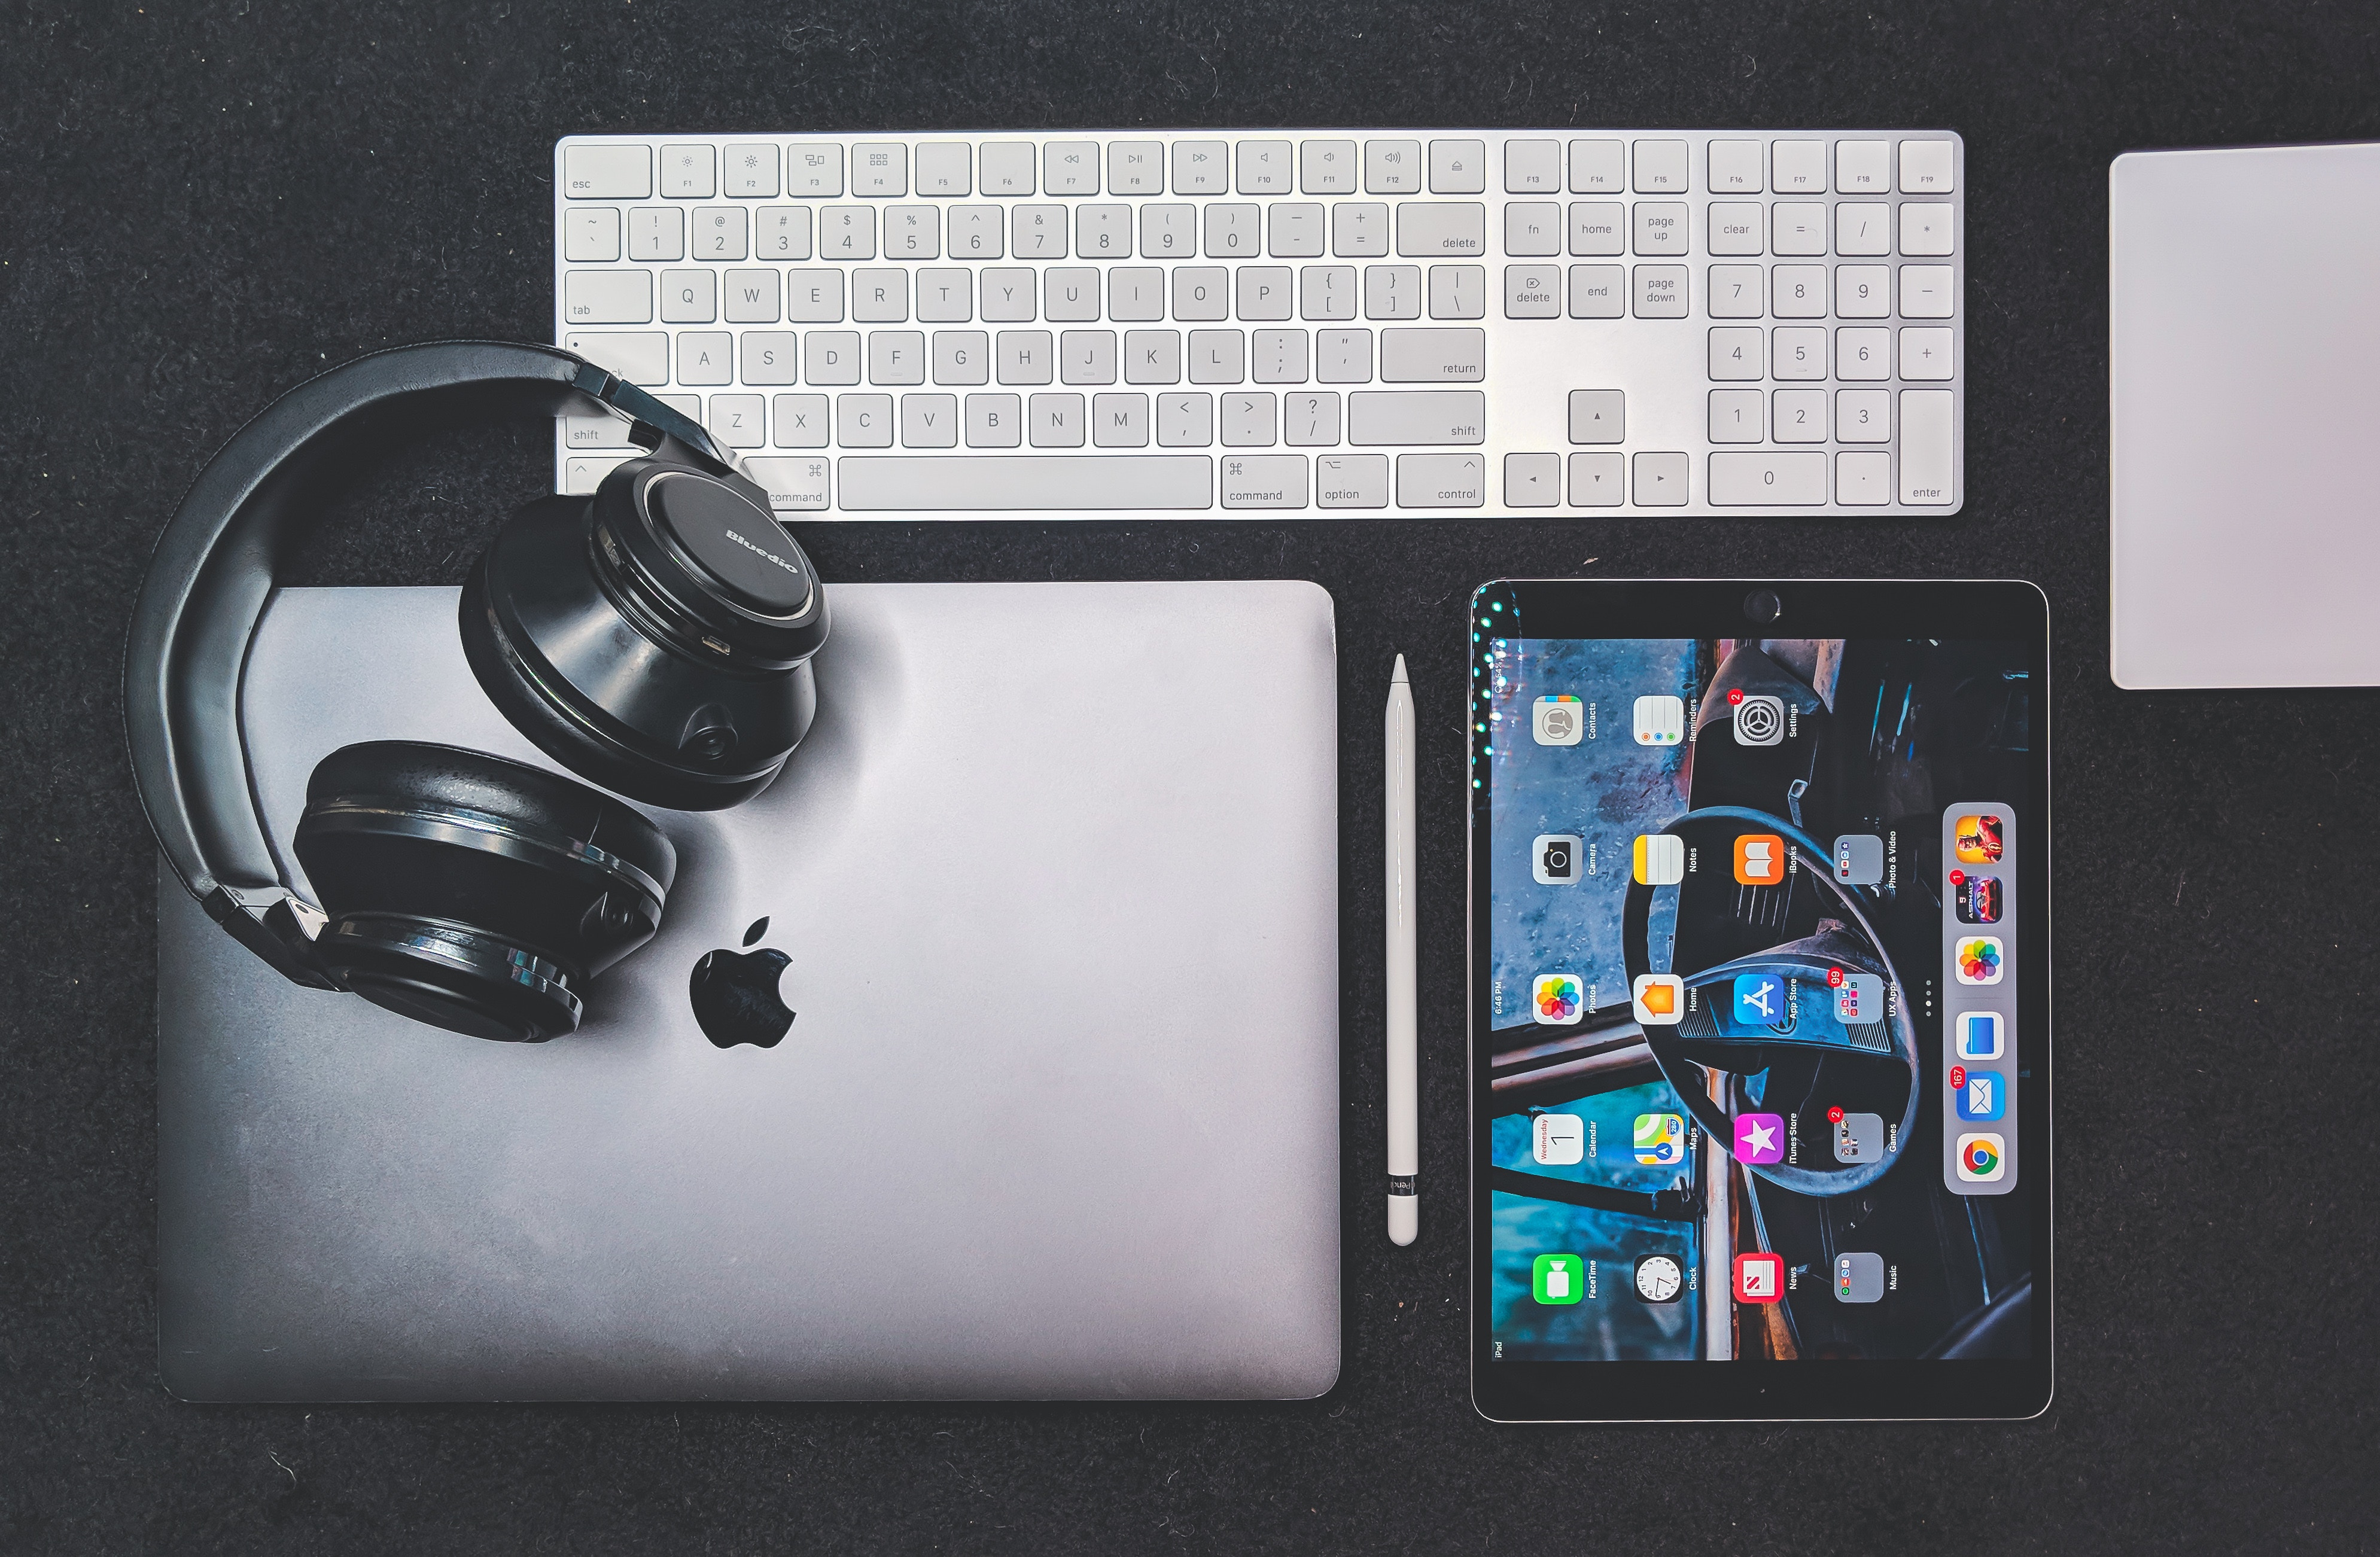 A collection of apple products, including a macbook pro, ipad, keyboard, headphones.